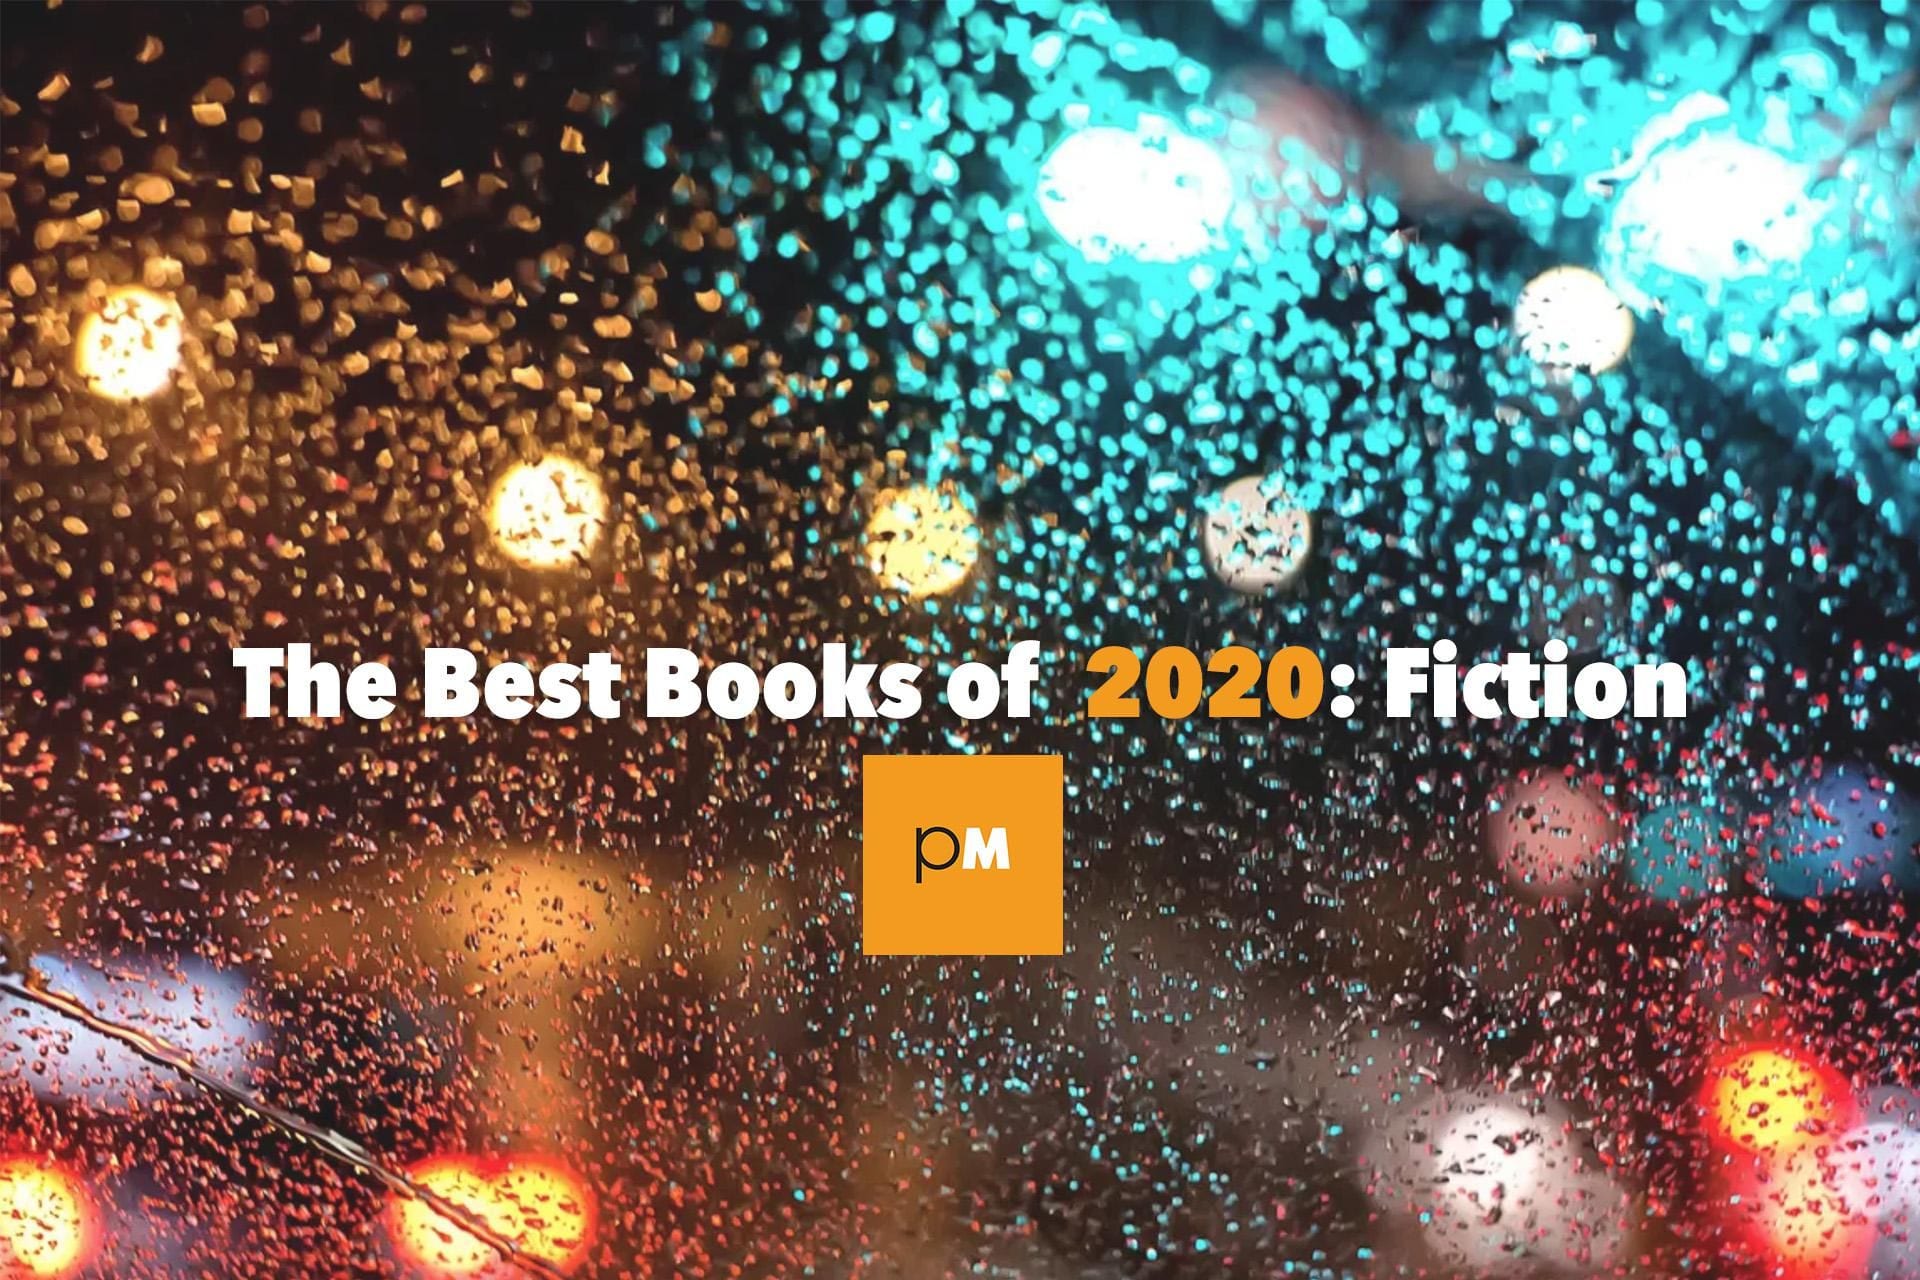 The Best Books of 2020: Fiction